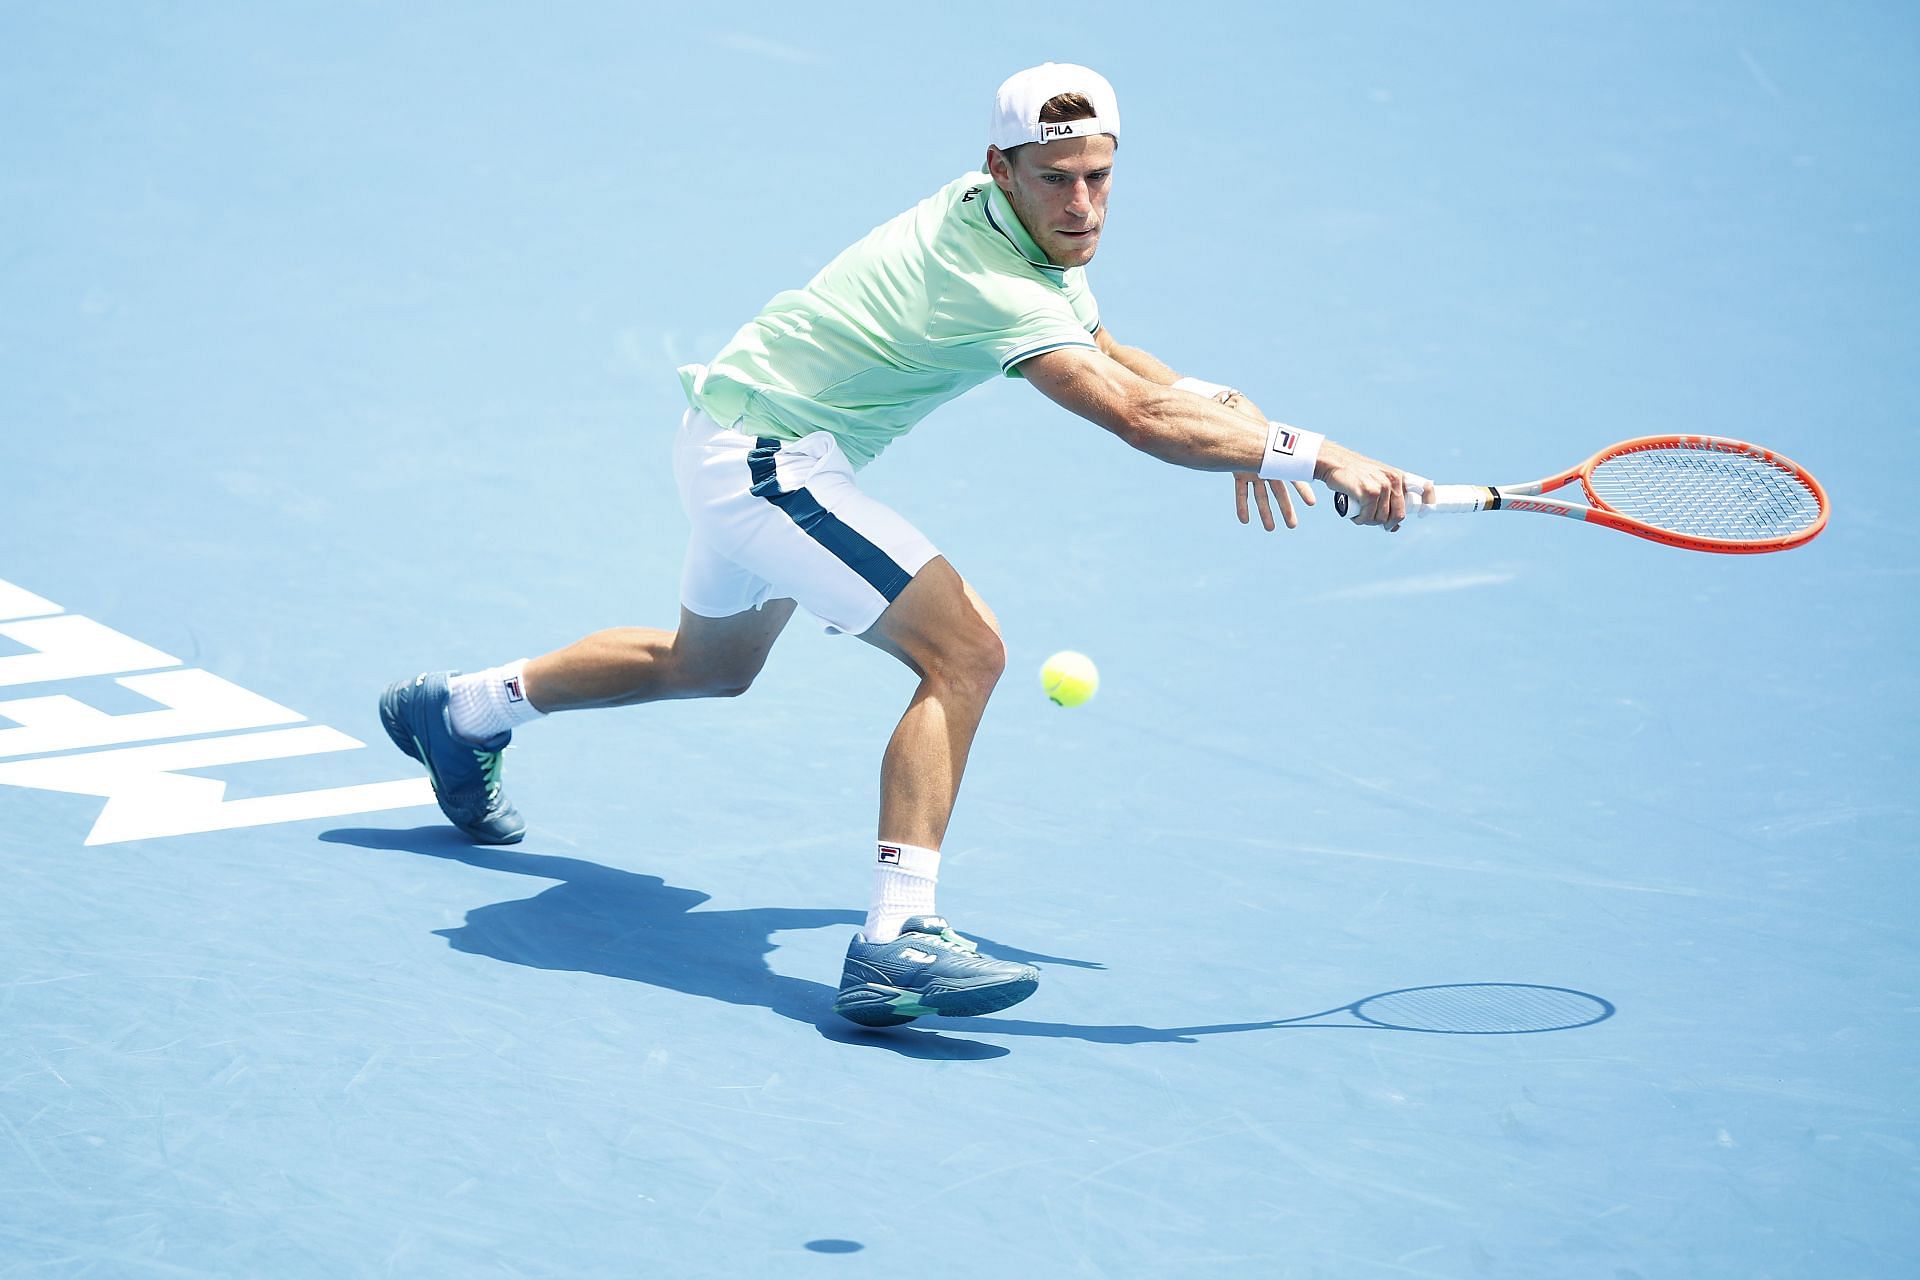 Reigning champion Schwartzman will be keen on defending his title